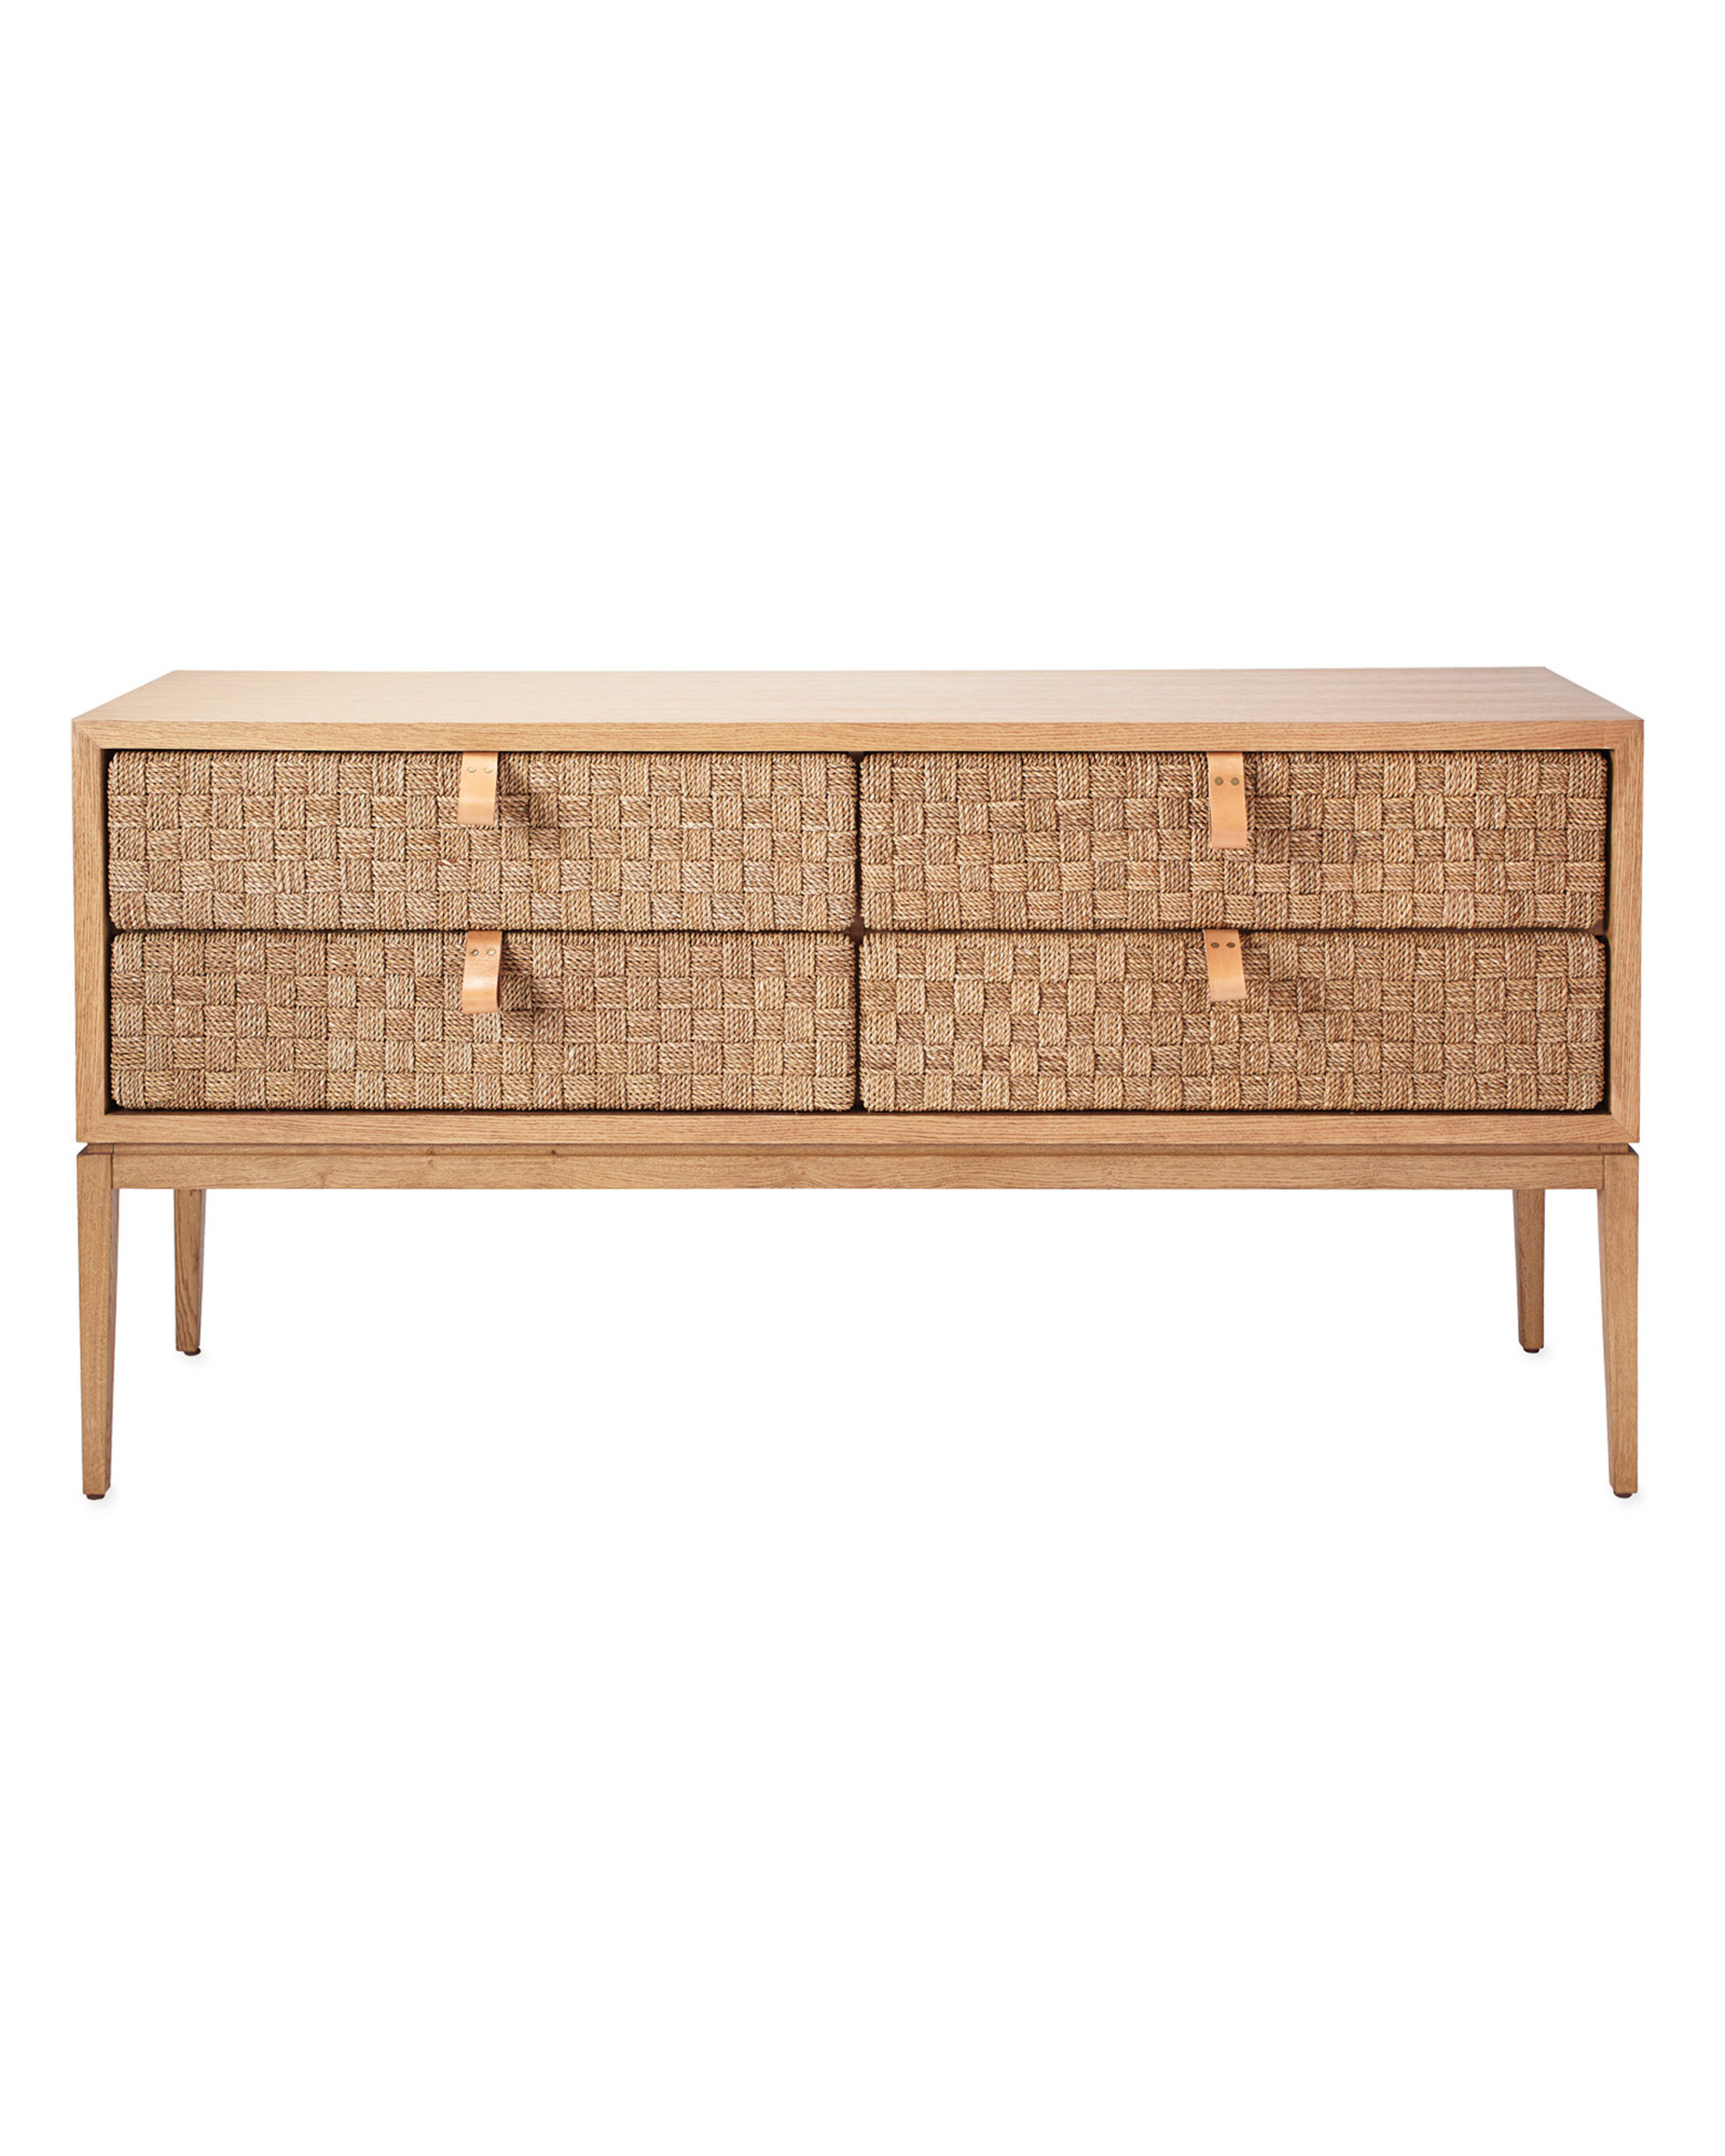 Caledonia Woven Console - Serena and Lily